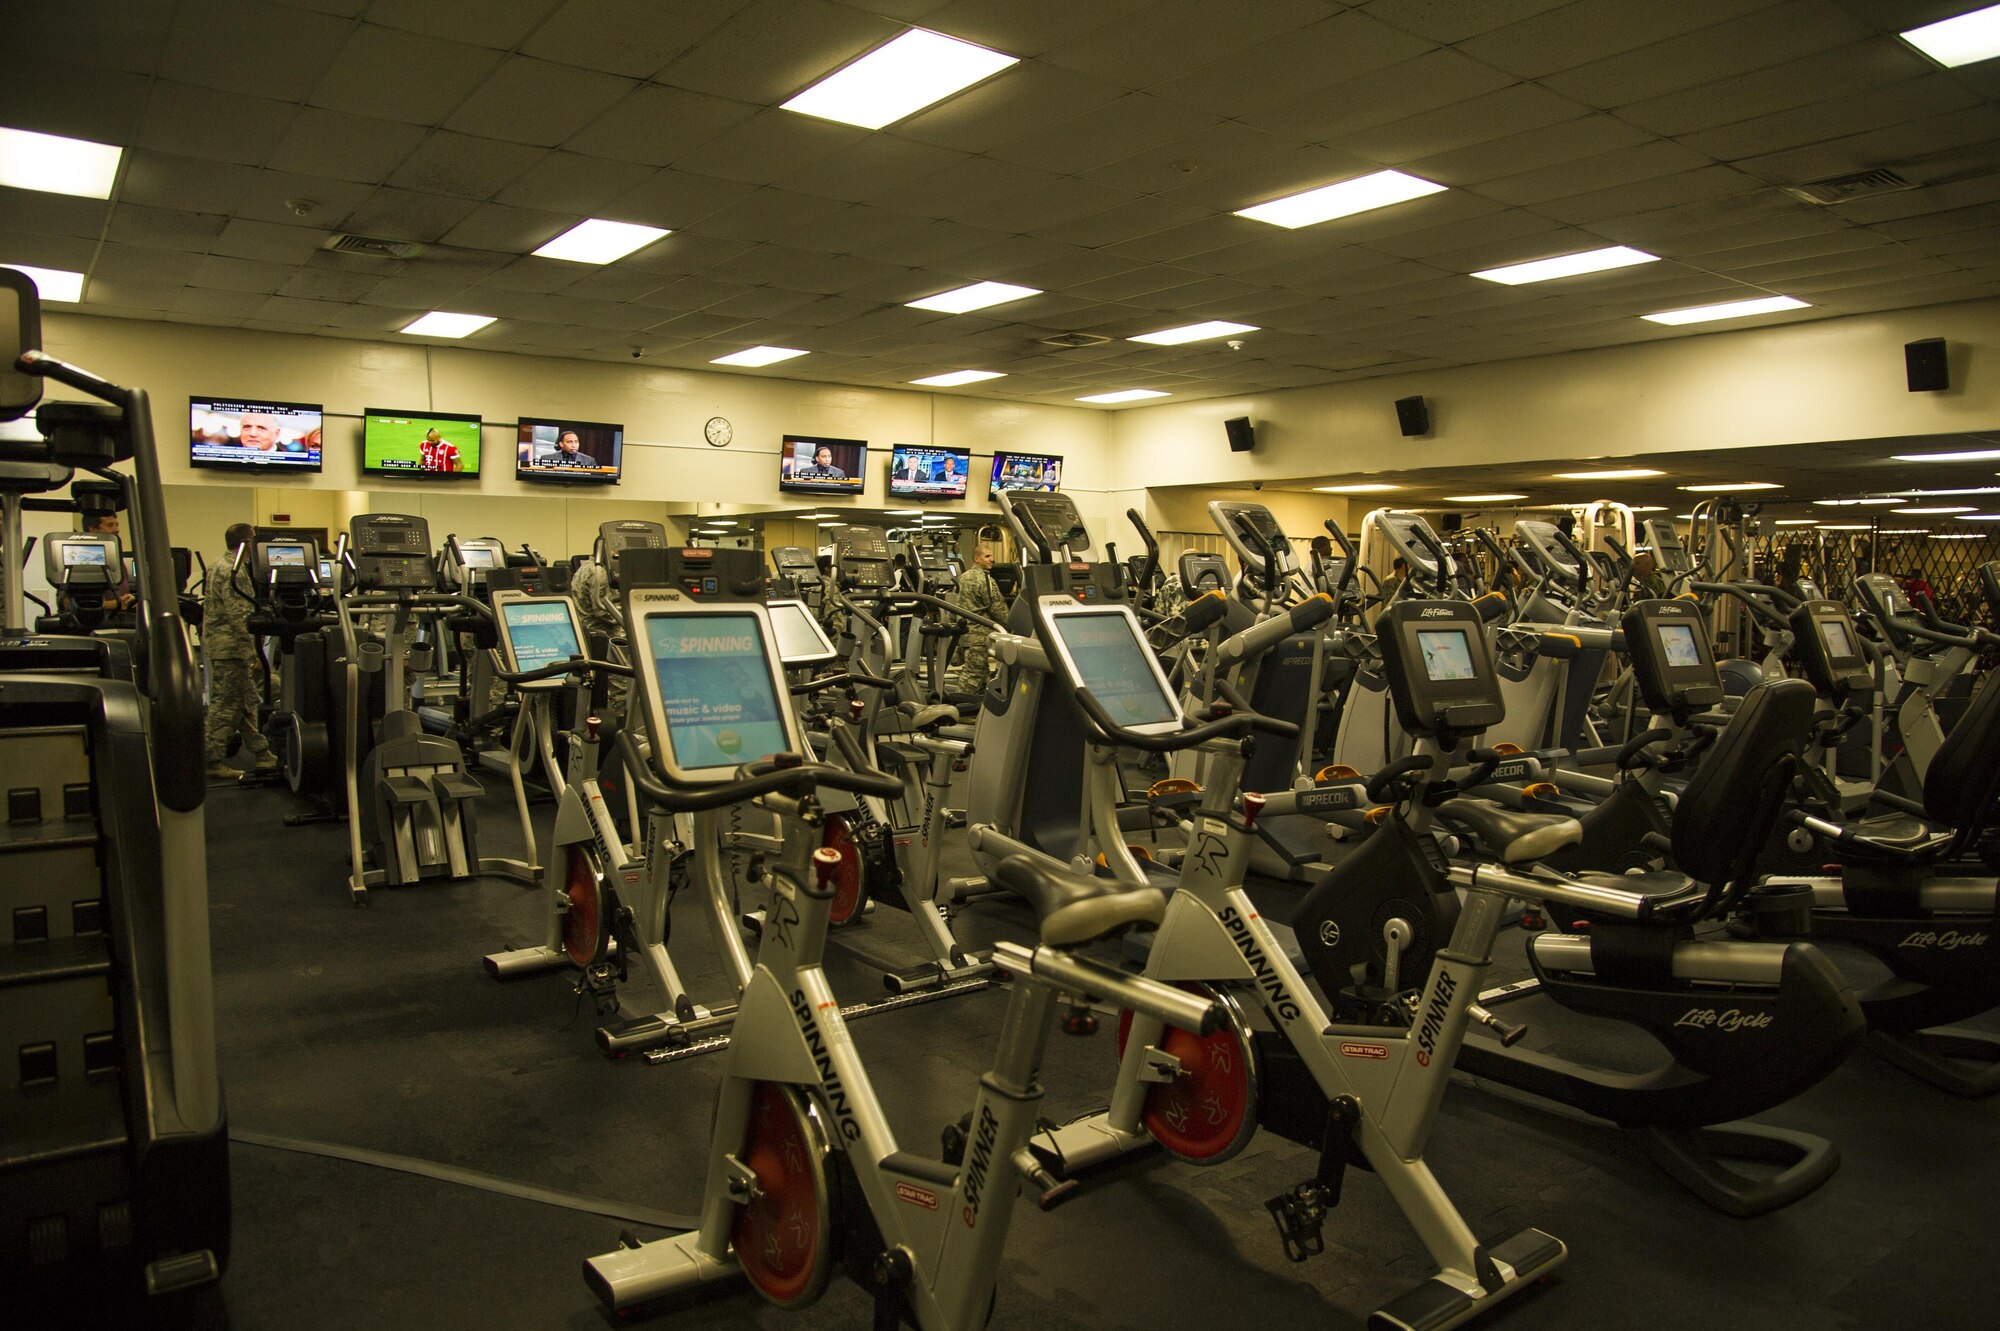 The Hickam Memorial Gym’s 24/7 section features cardio equipment and weight equipment, Joint Base Pearl Harbor-Hickam, Hawaii, Nov. 20, 2017. The gym’s 24-hour access is available to all authorized users over the age of 18. Individuals who do not have a common access card may purchase a proximity card for a nominal fee. (U.S. Air Force photo by Tech. Sgt. Heather Redman)